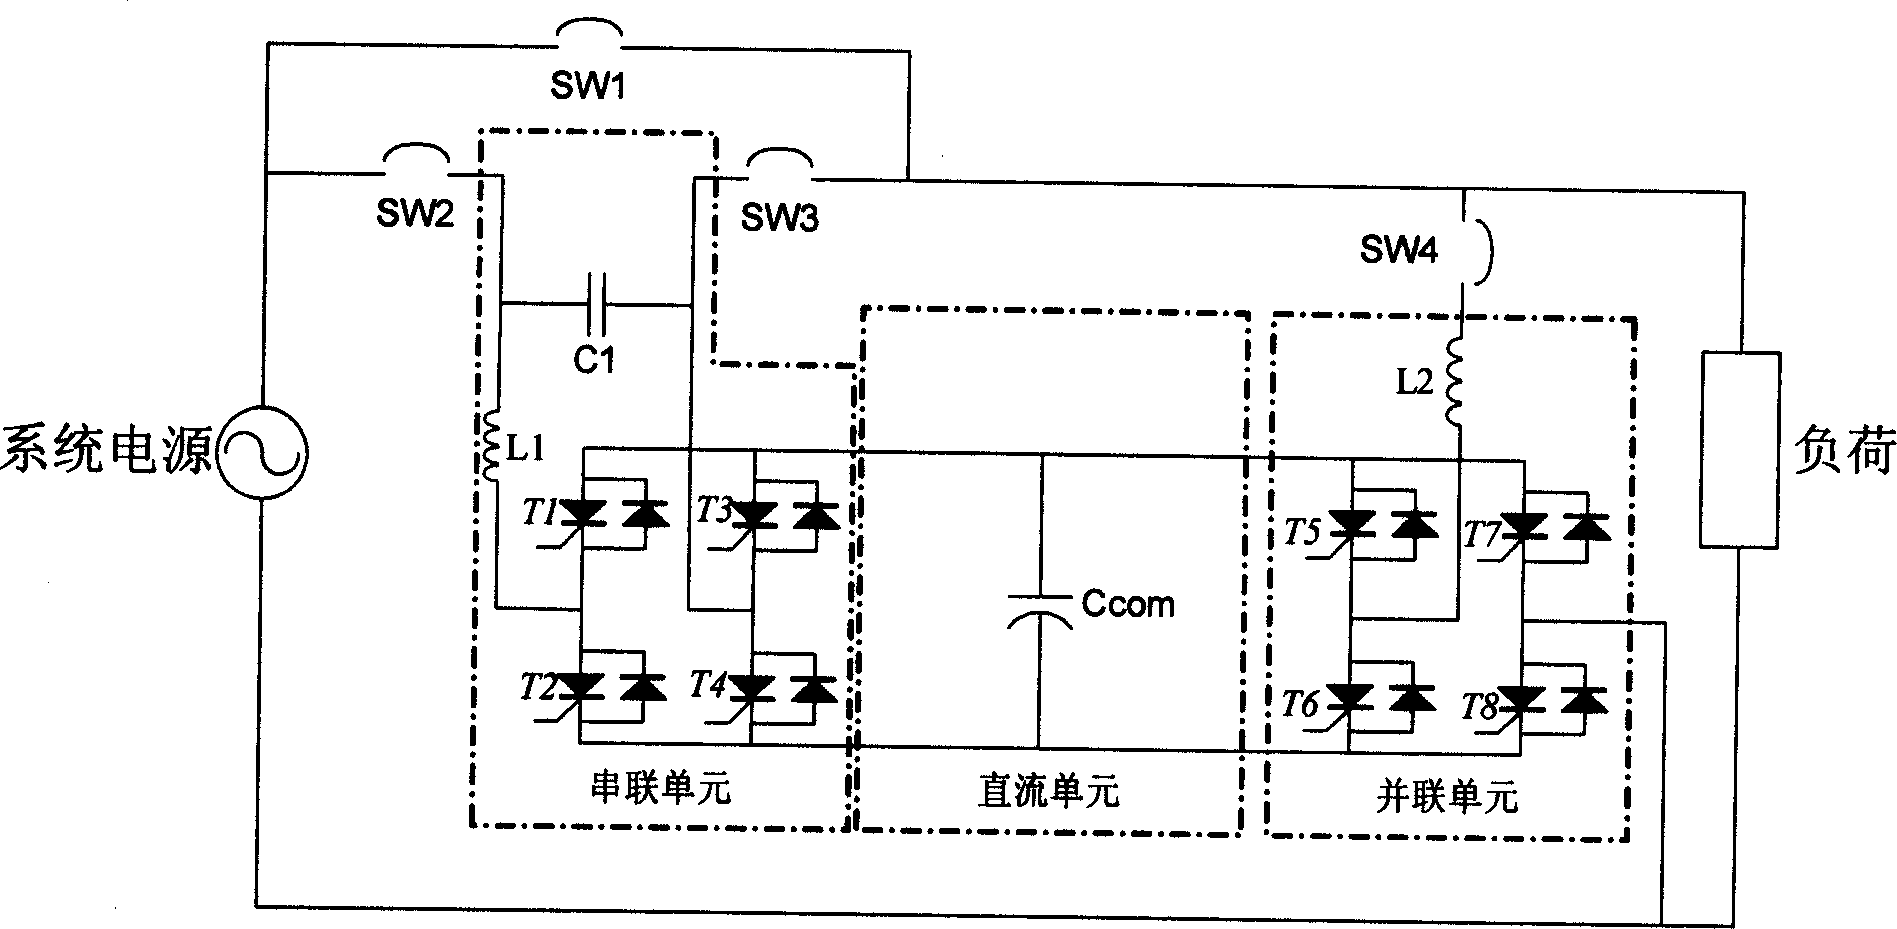 Unified electric energy quality controller